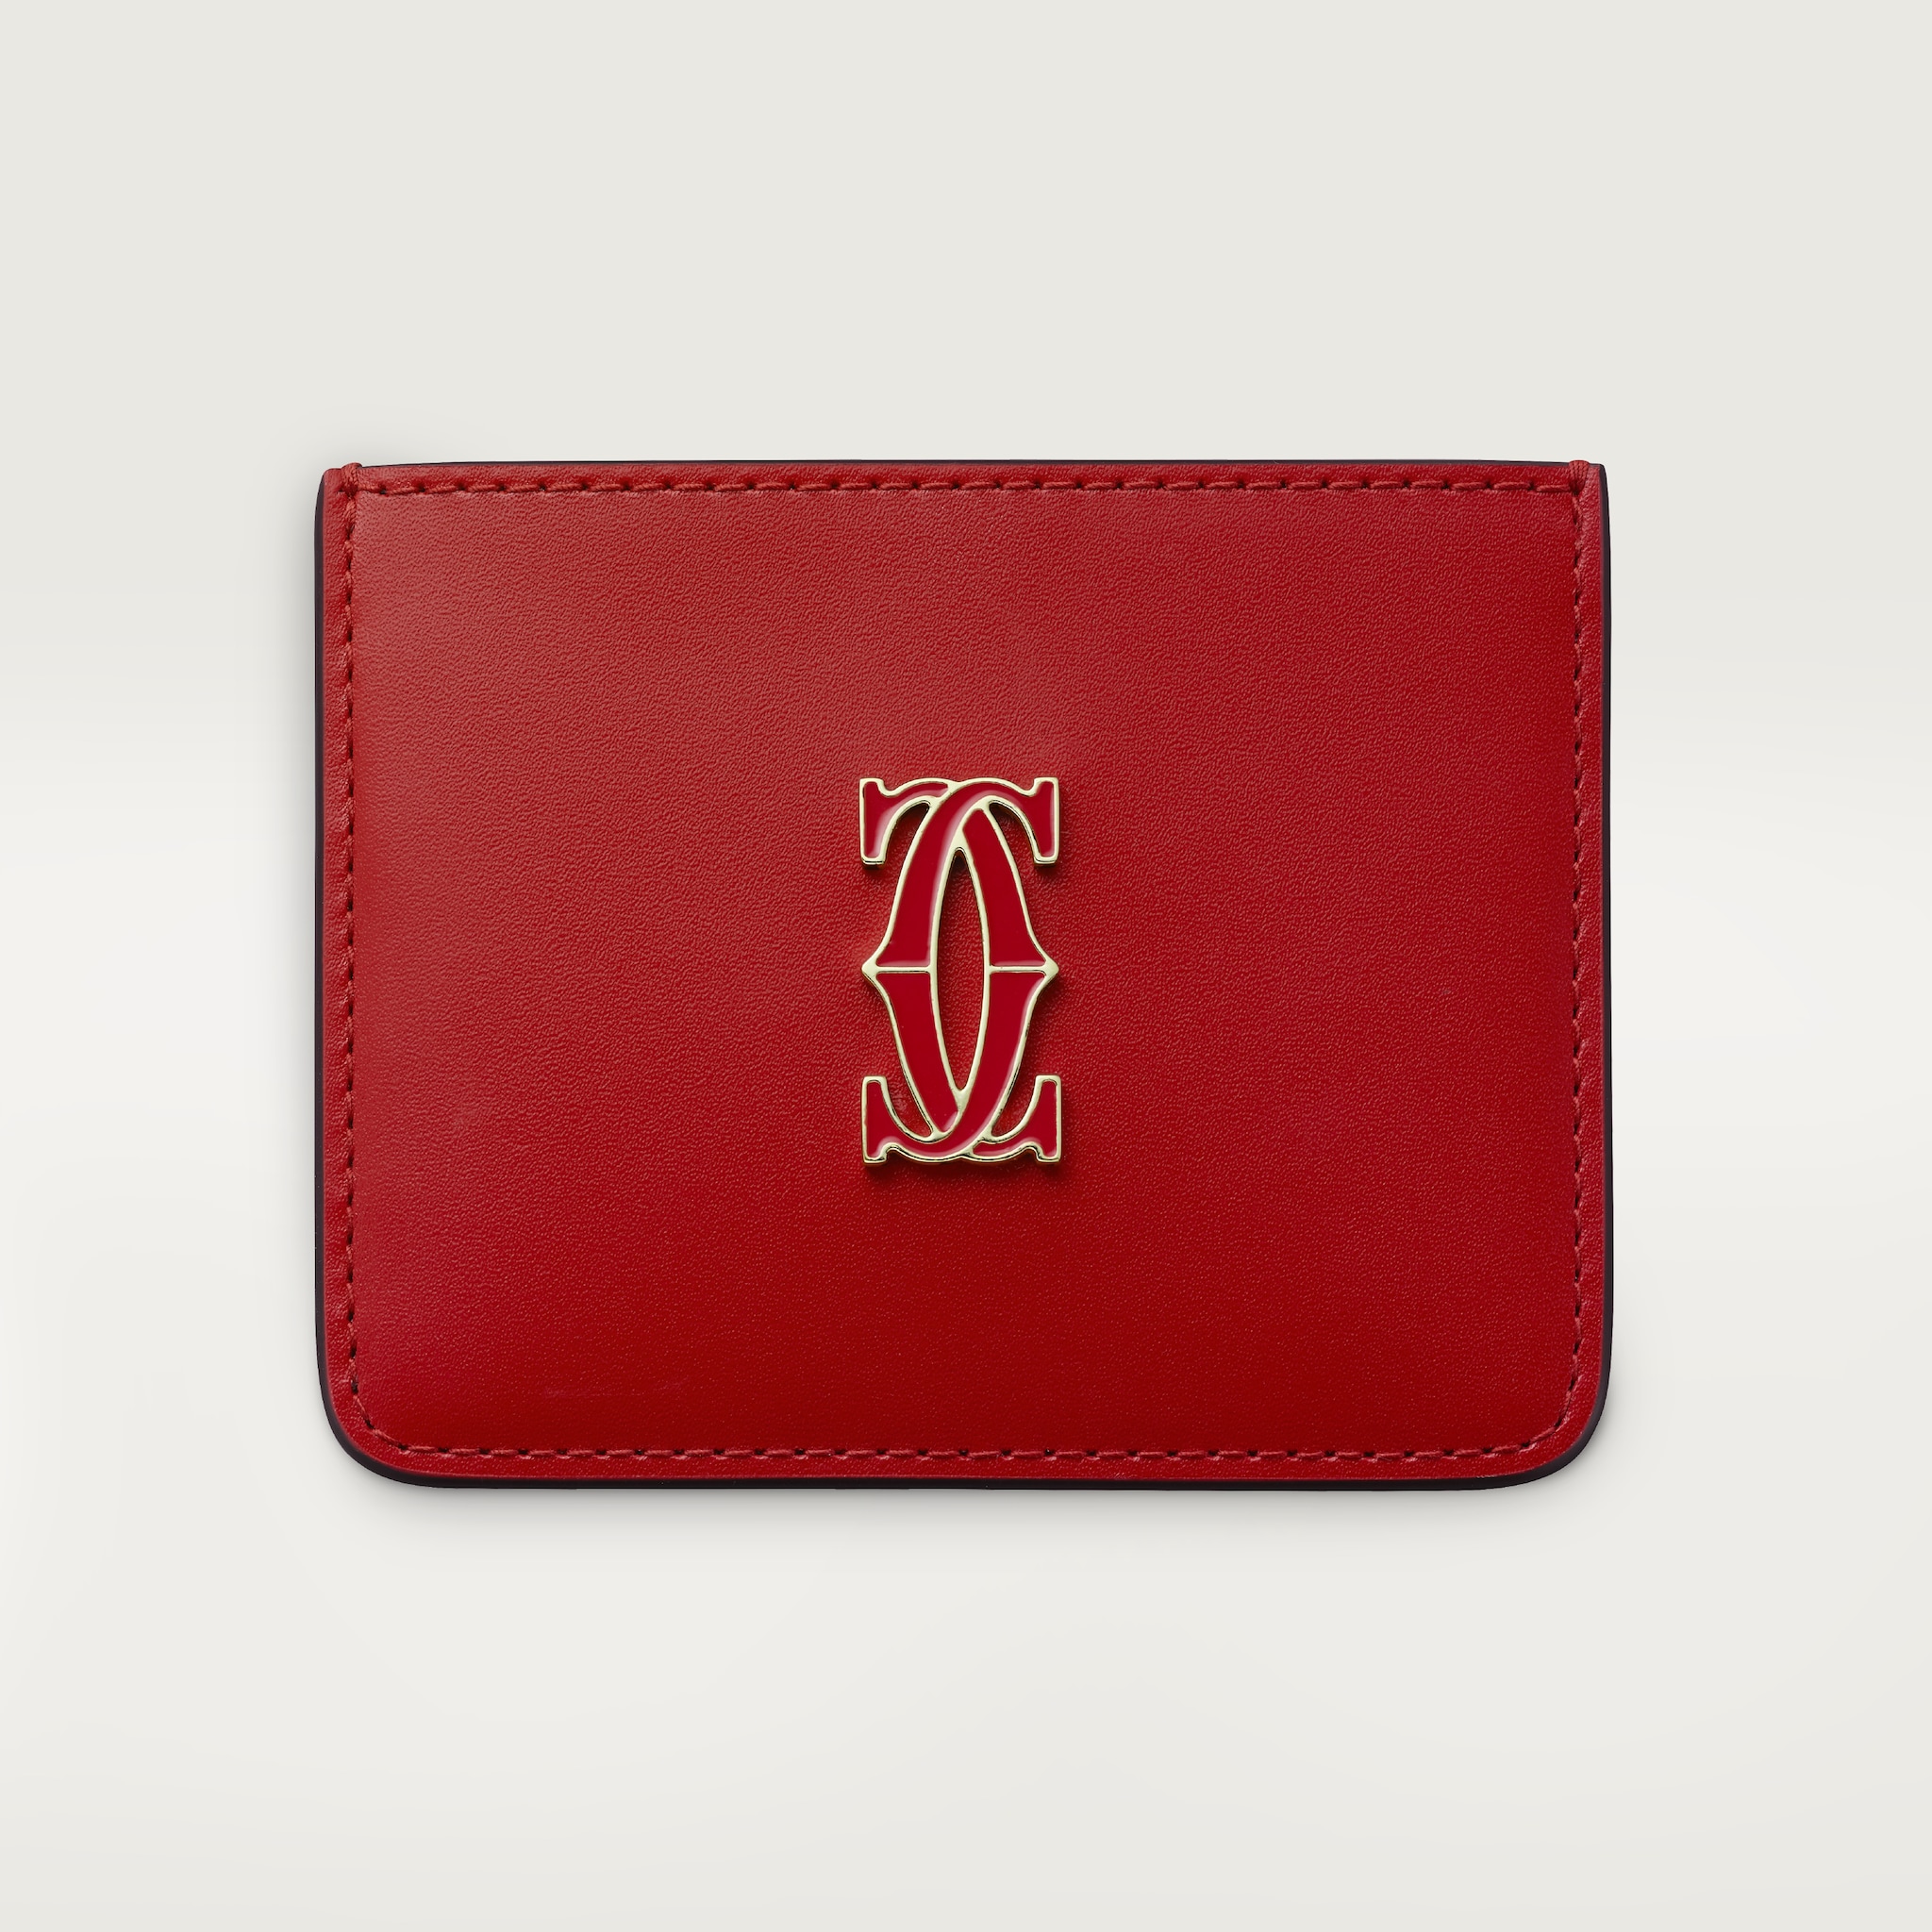 C de Cartier Small Leather Goods, Card holderRed calfskin, golden finish and red enamel